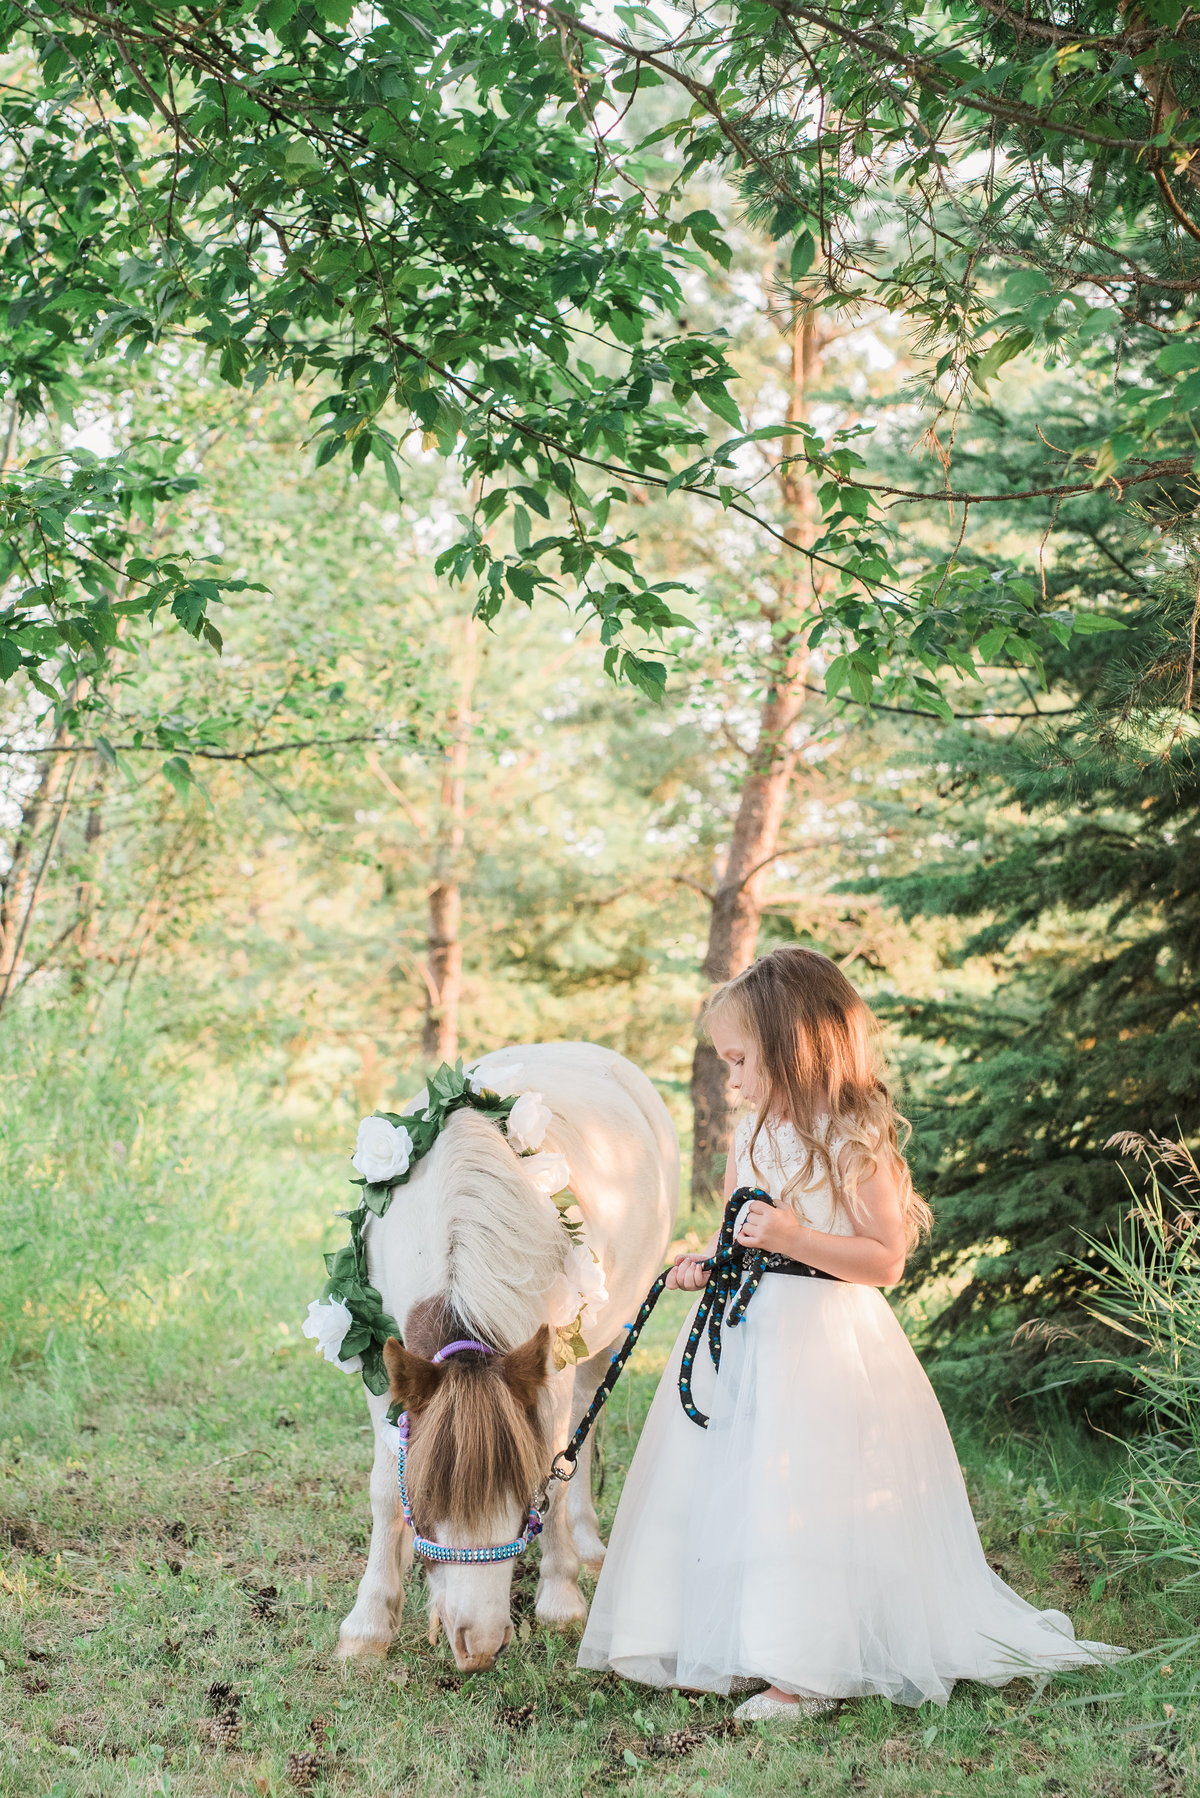 photo of little girl and pony in a forest